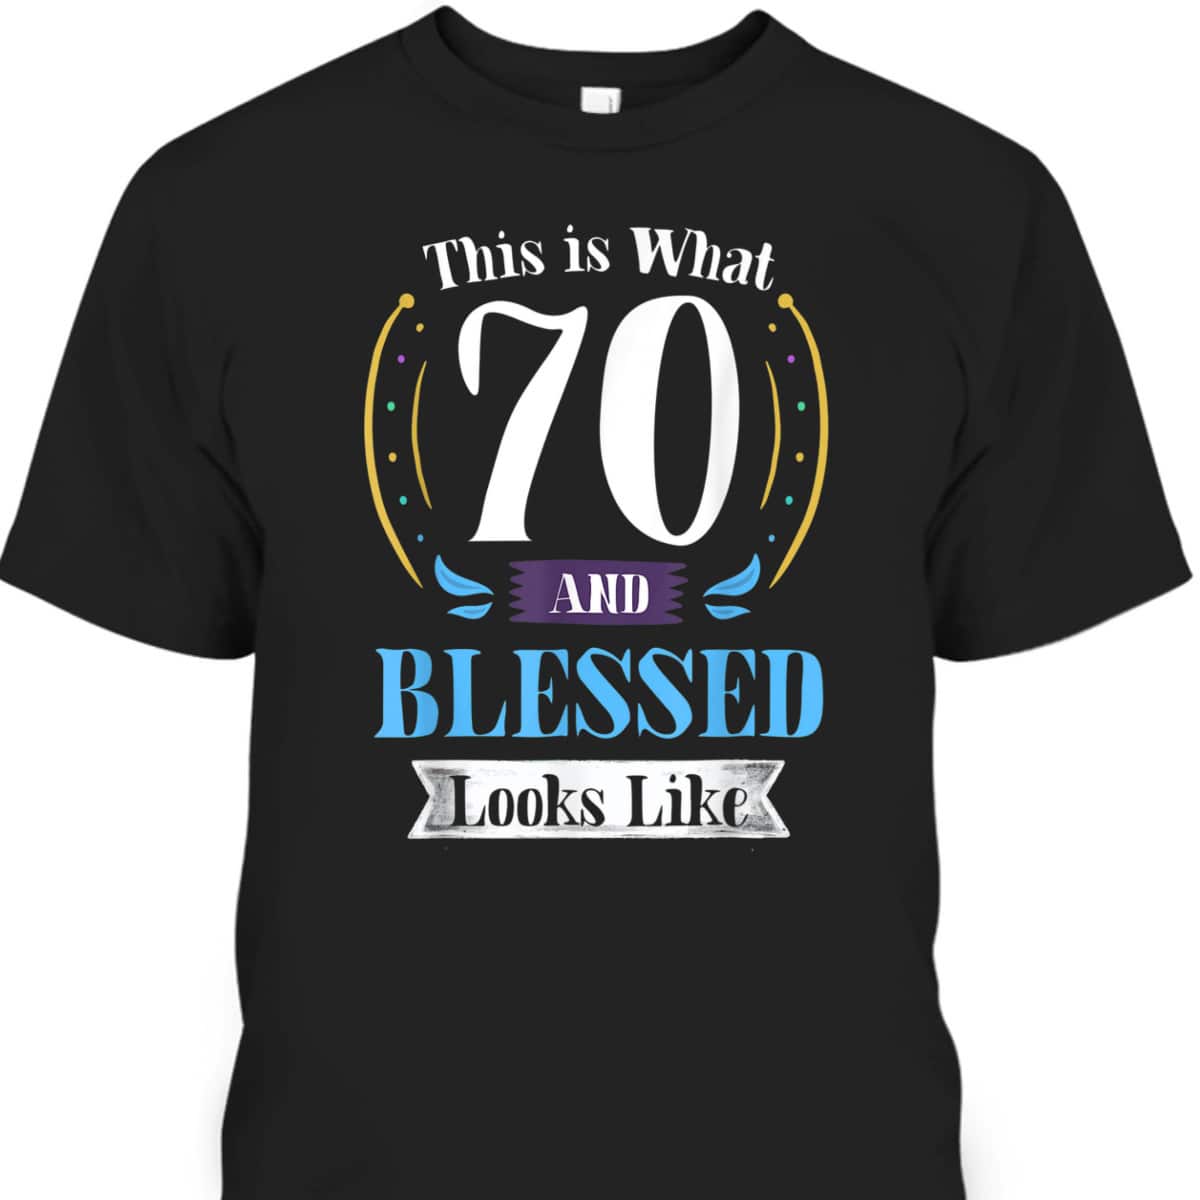 This Is What 70 And Blessed 70th Birthday Christian T-Shirt